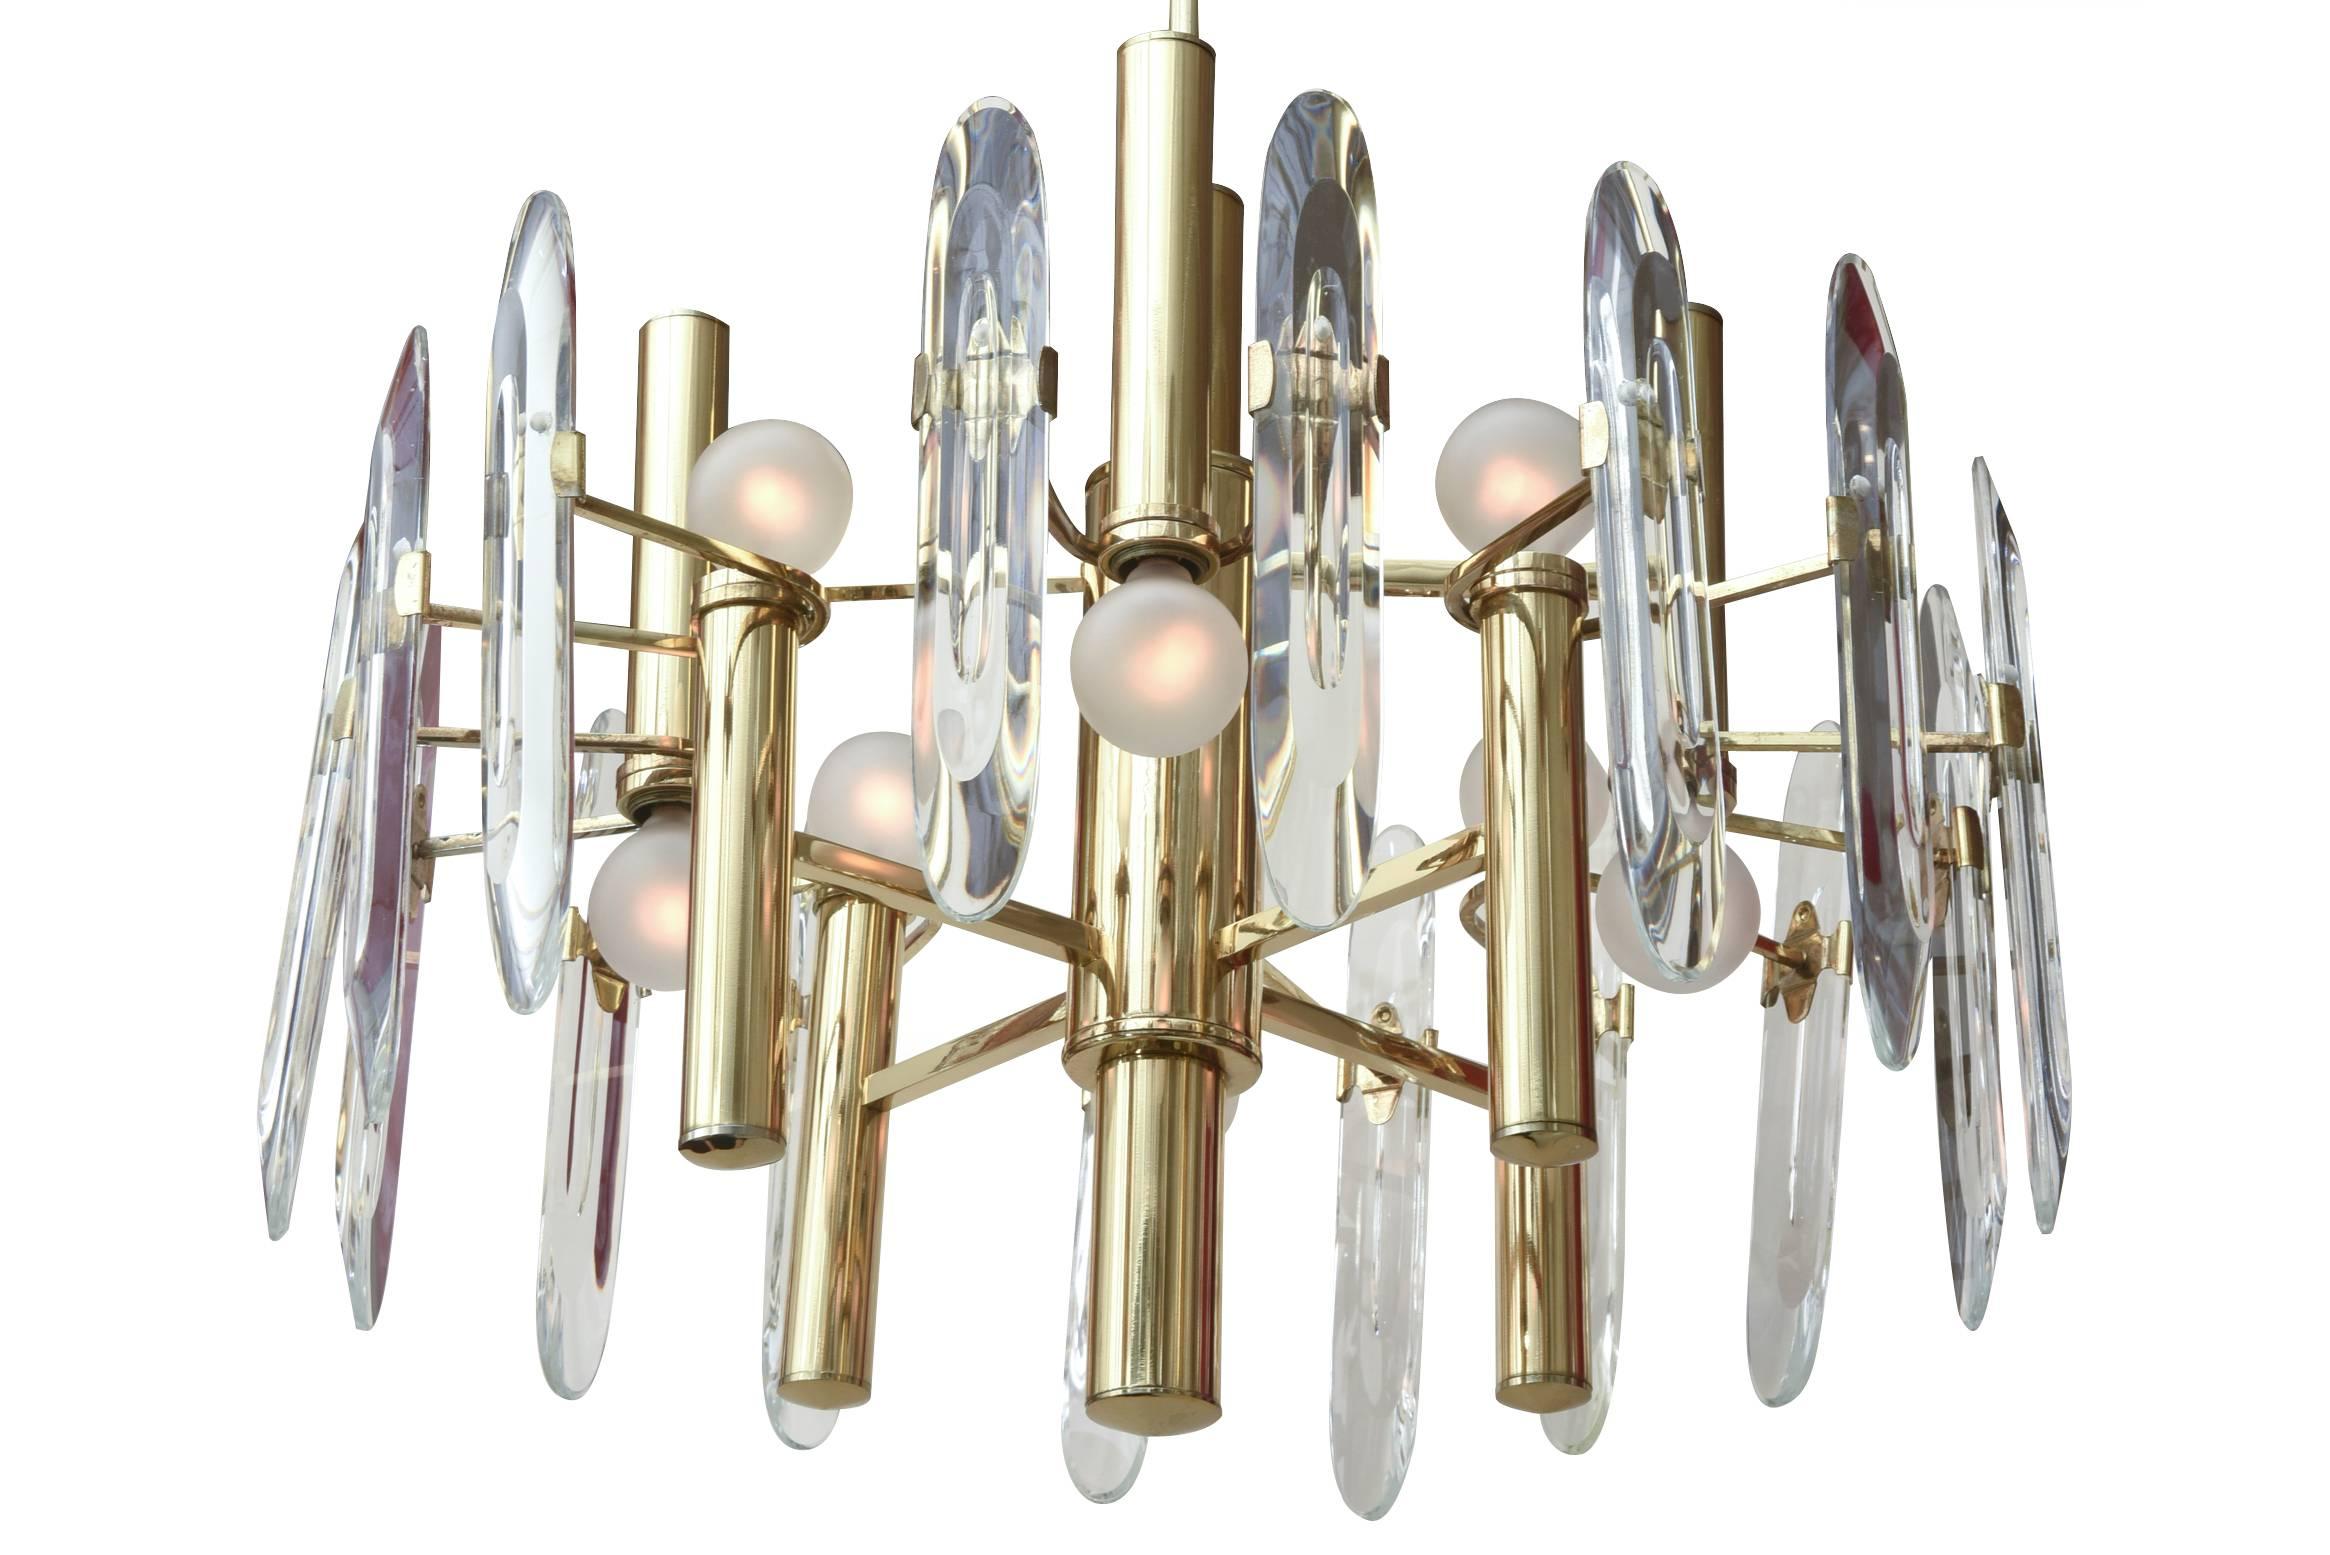 This modern elegant Italian vintage Gaetano Sciolari eight-light chandelier has 16 beveled crystal prism glass pendants that attach to each arm. They do detach for shipping. The light bulb placement alternate up and down. It has been re-plated to a